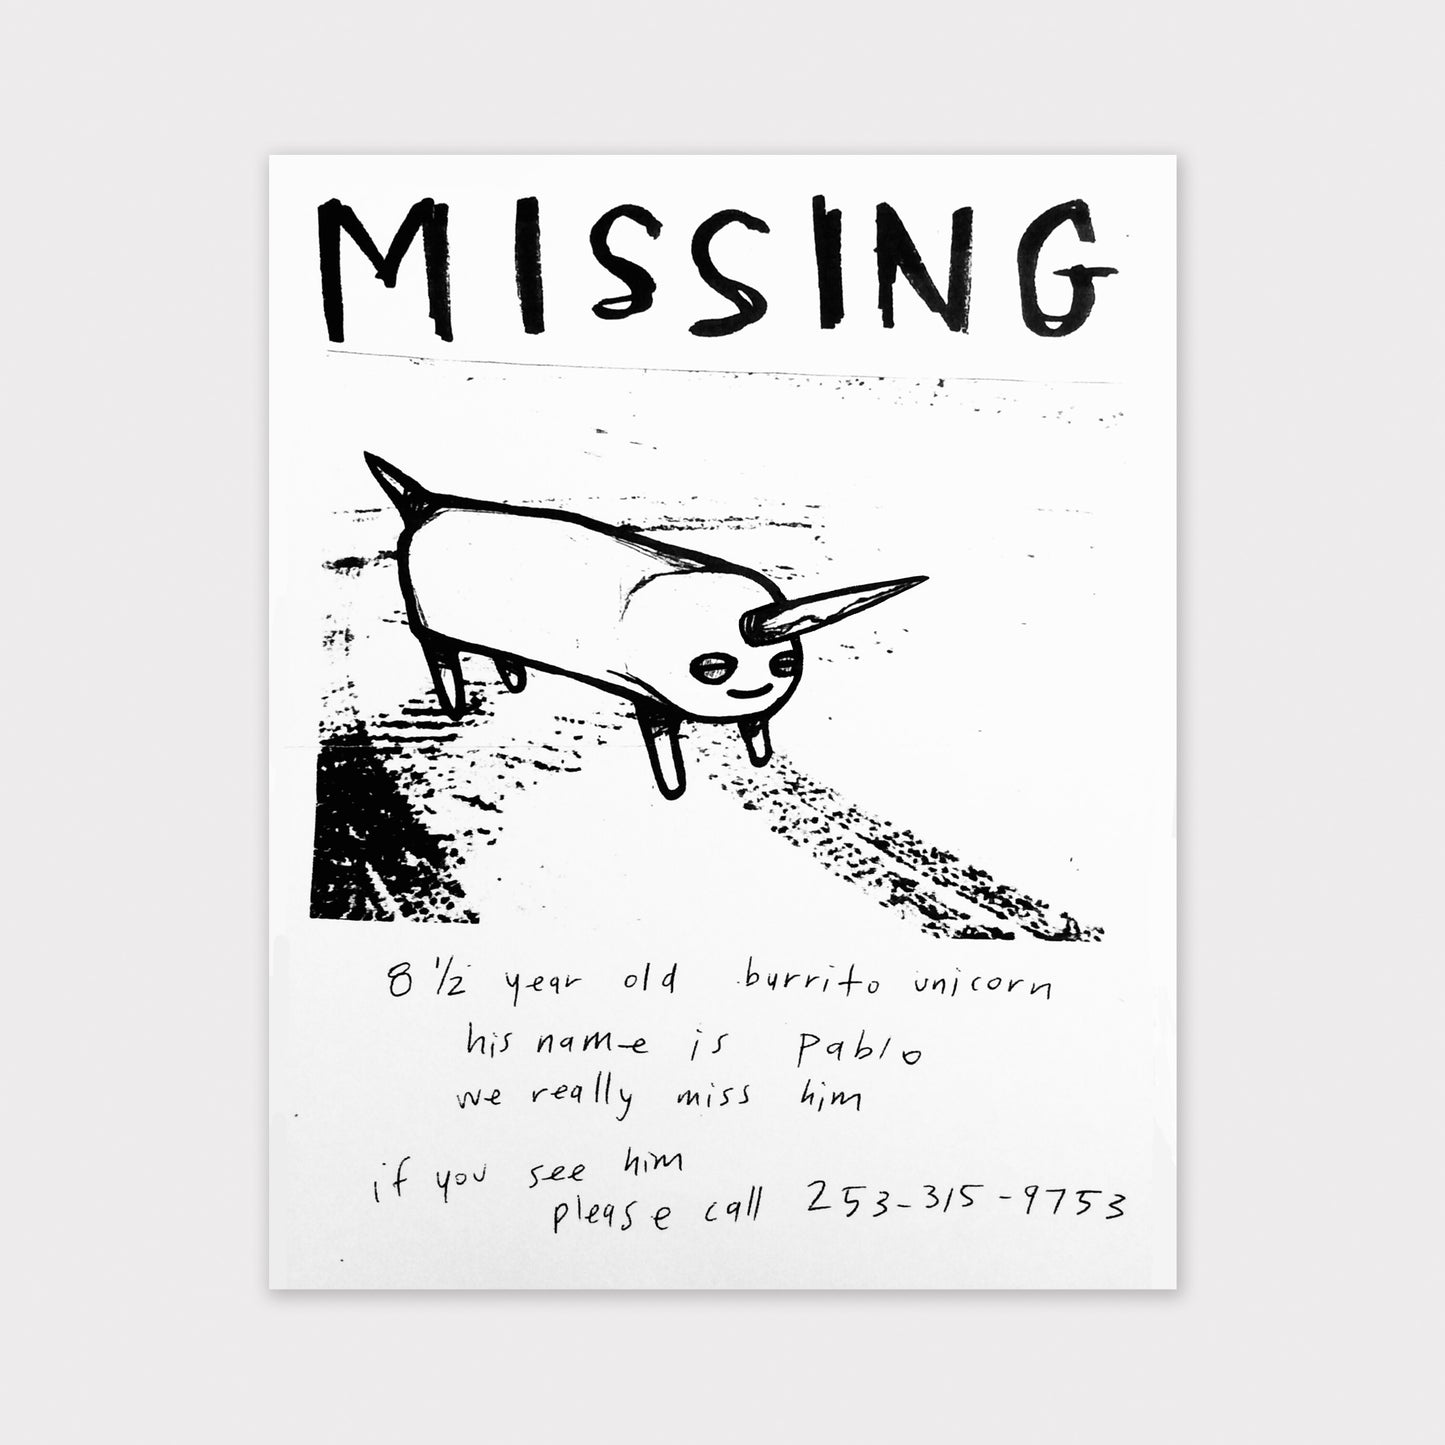 Burrito Unicorn Missing Poster (Pablo with Closed Eyes)